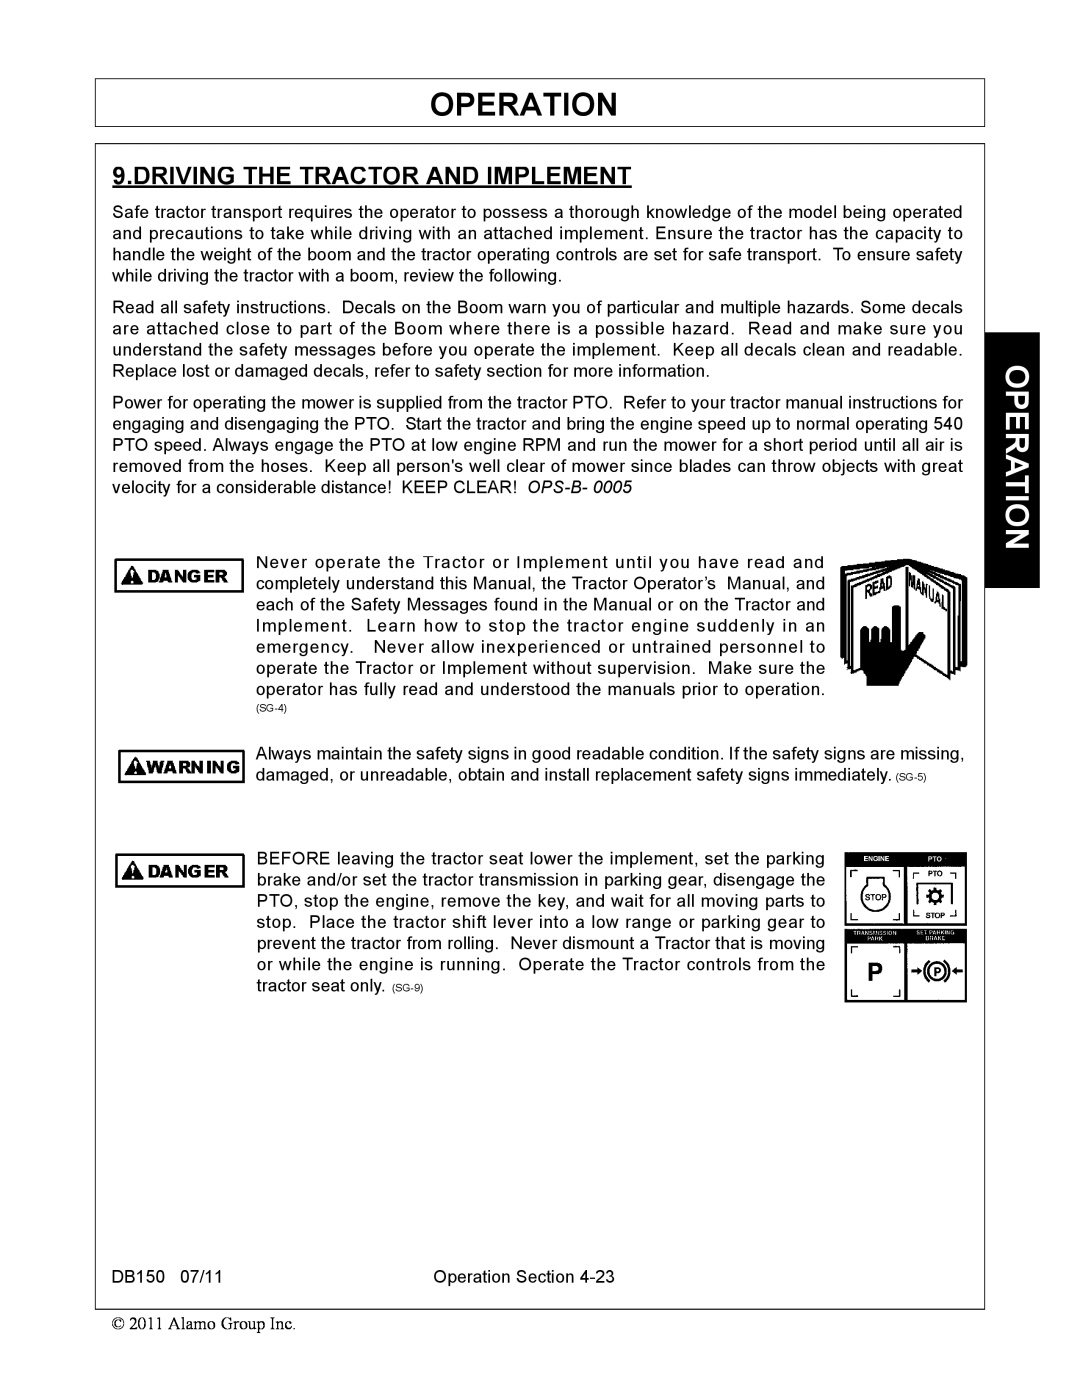 Rhino Mounts DB150 manual Driving The Tractor And Implement, Operation, SG-4 